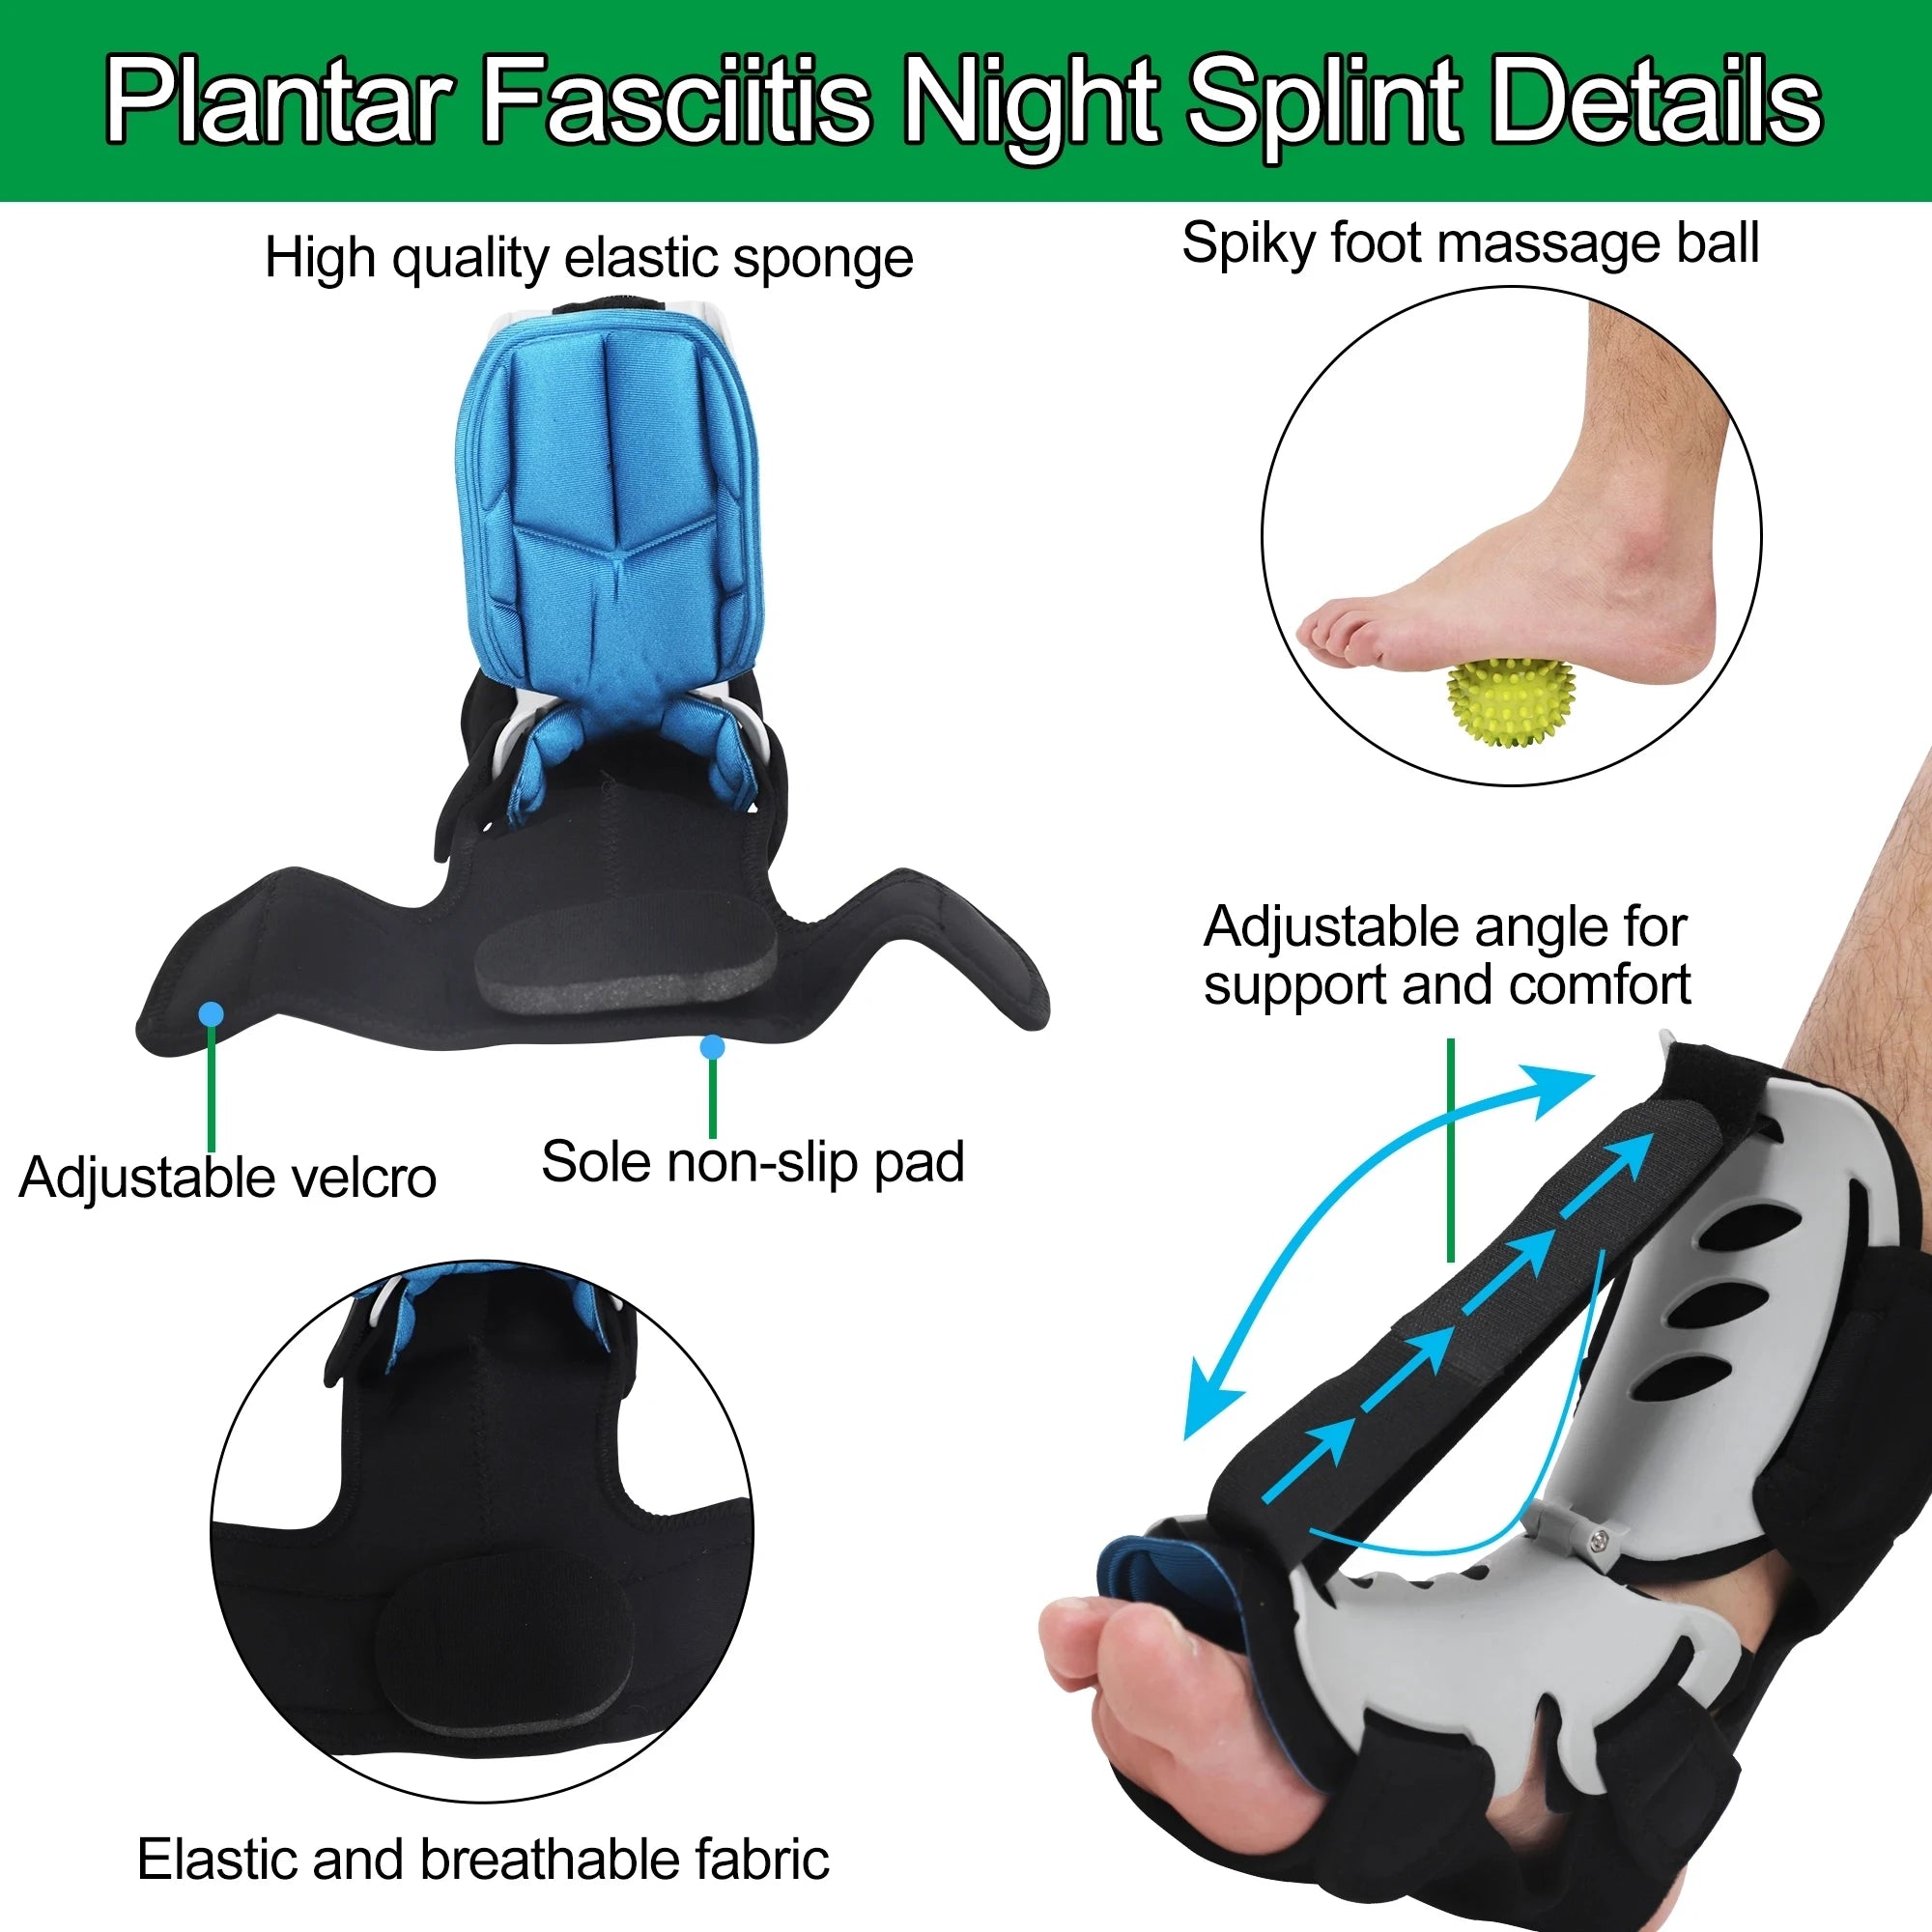 Drop Foot Night Splint Brace Strap Foot Drop Orthosis Posture Corrector Ankle Support Foot Support Brace Ankle Joint Fixed Strip